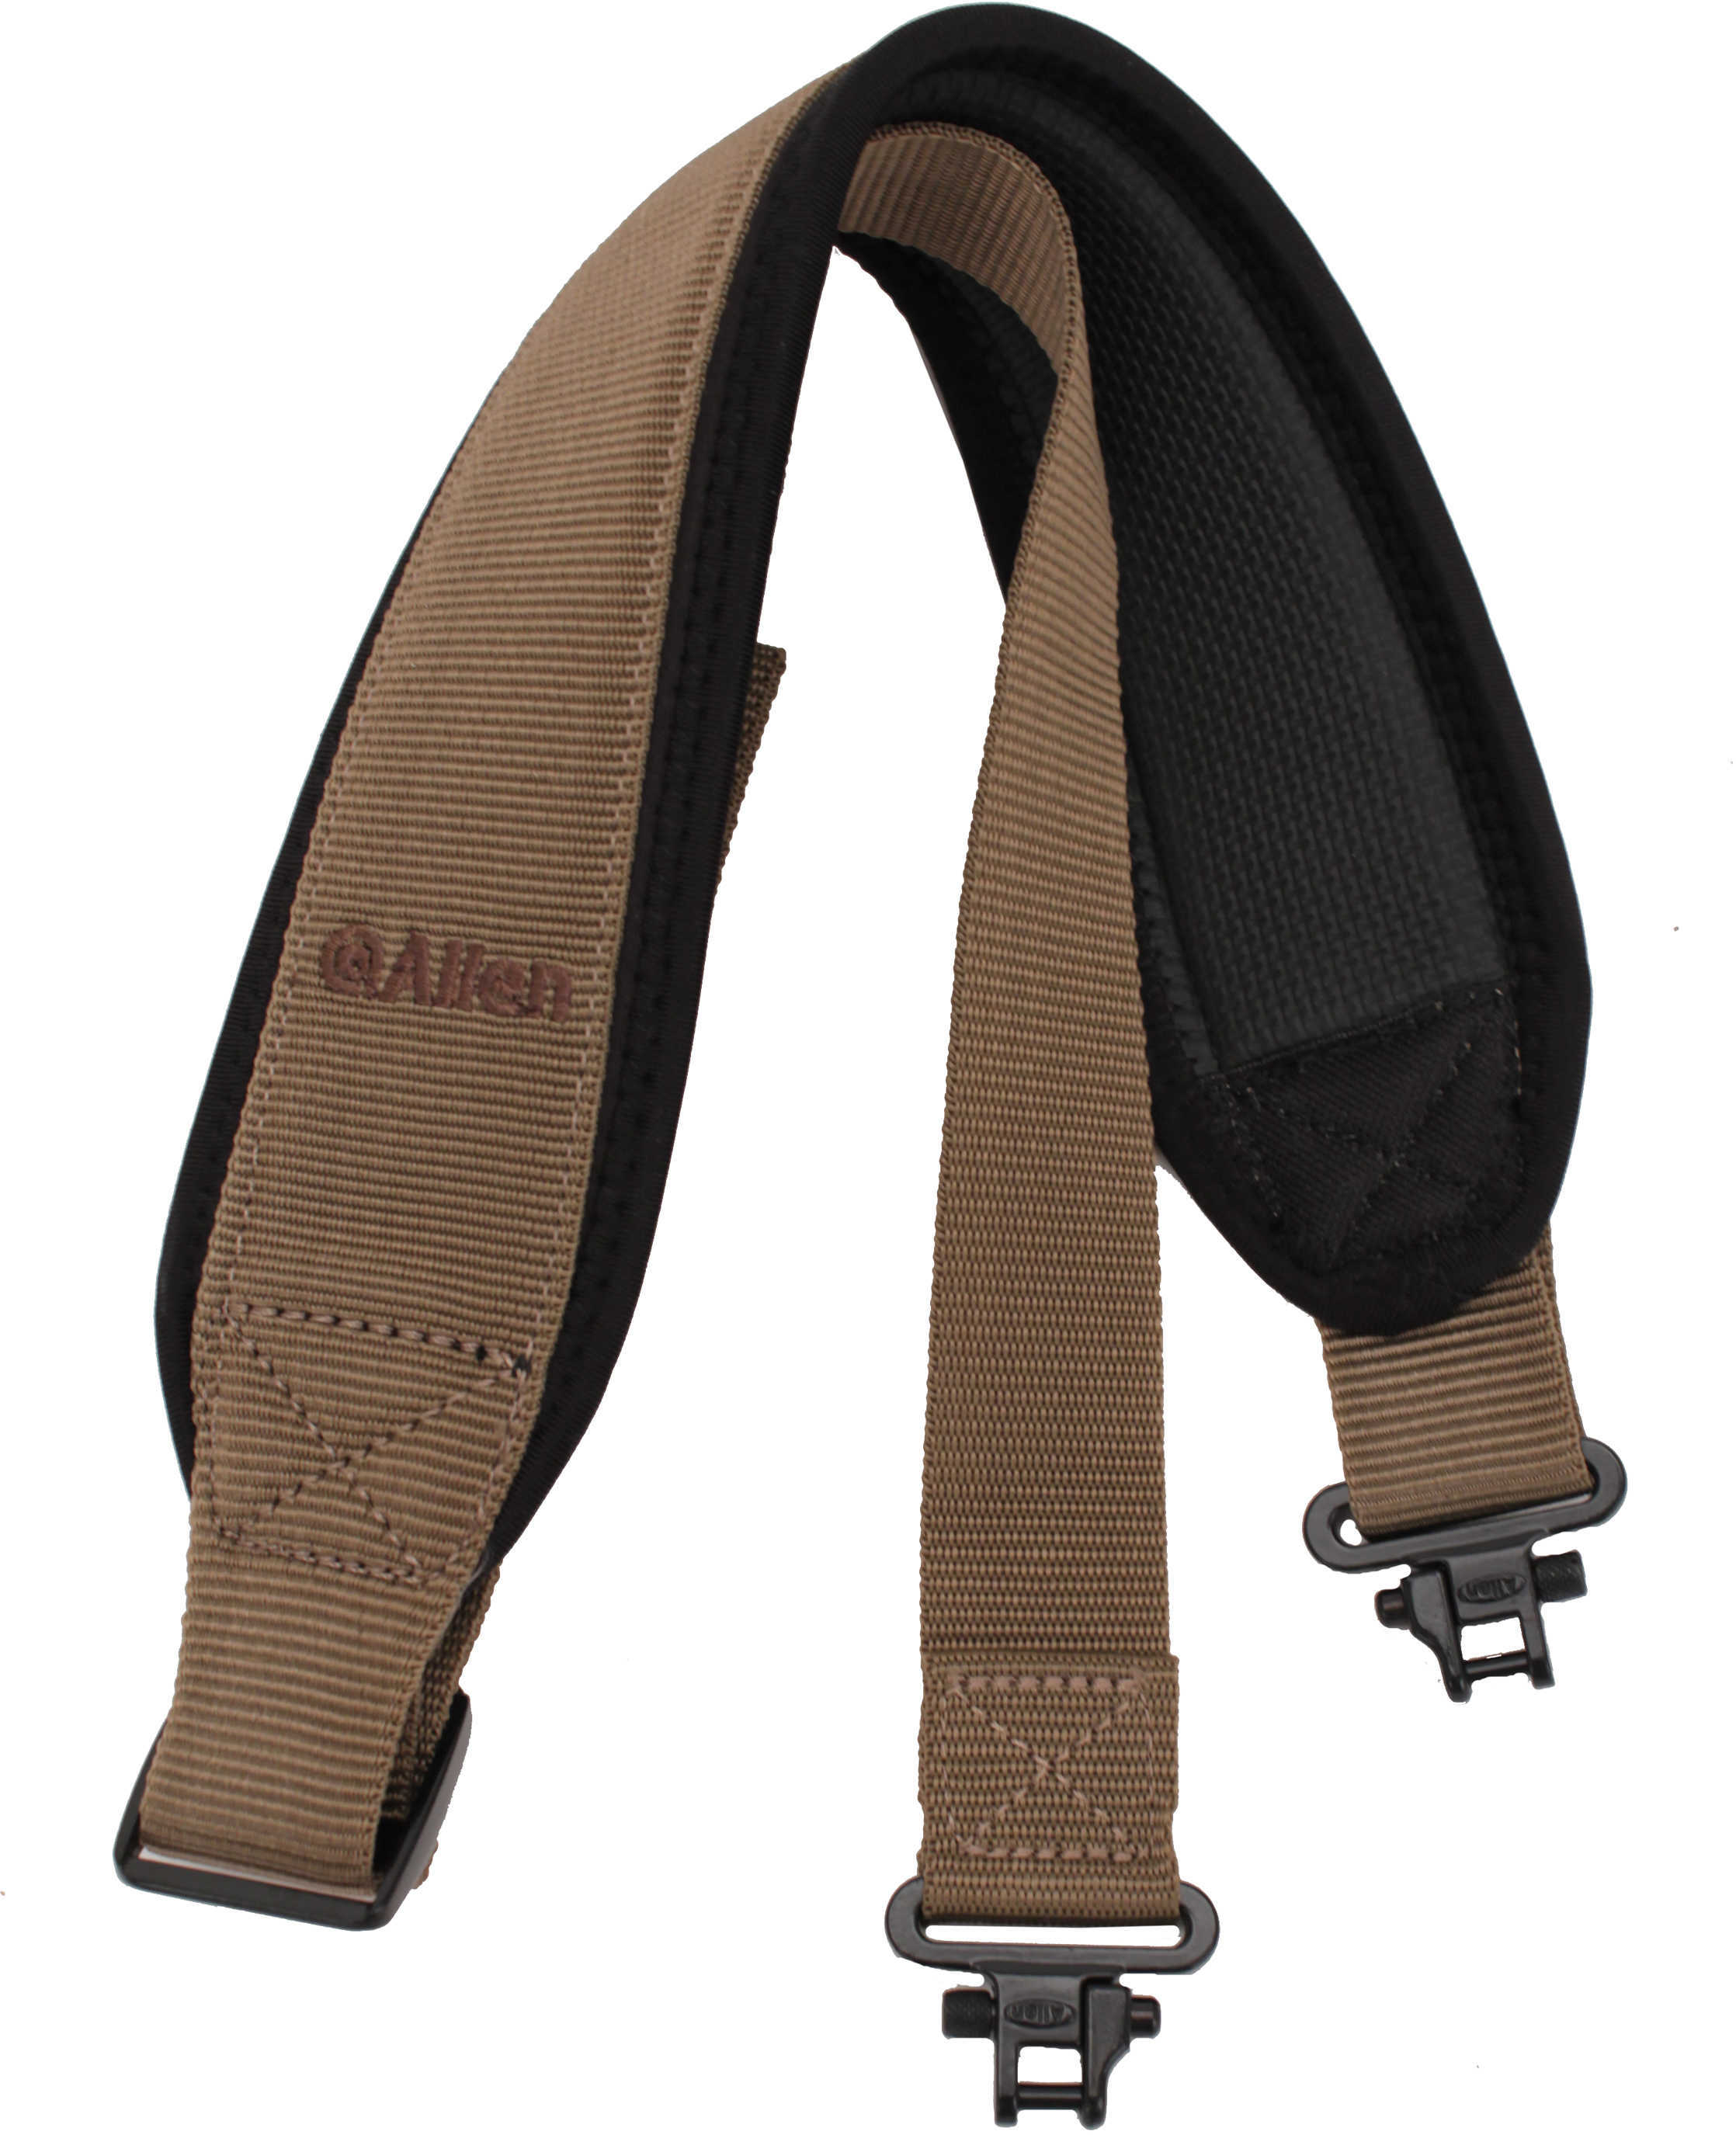 Allen Cases Signature Sling With Swivels Tan/Black 8331